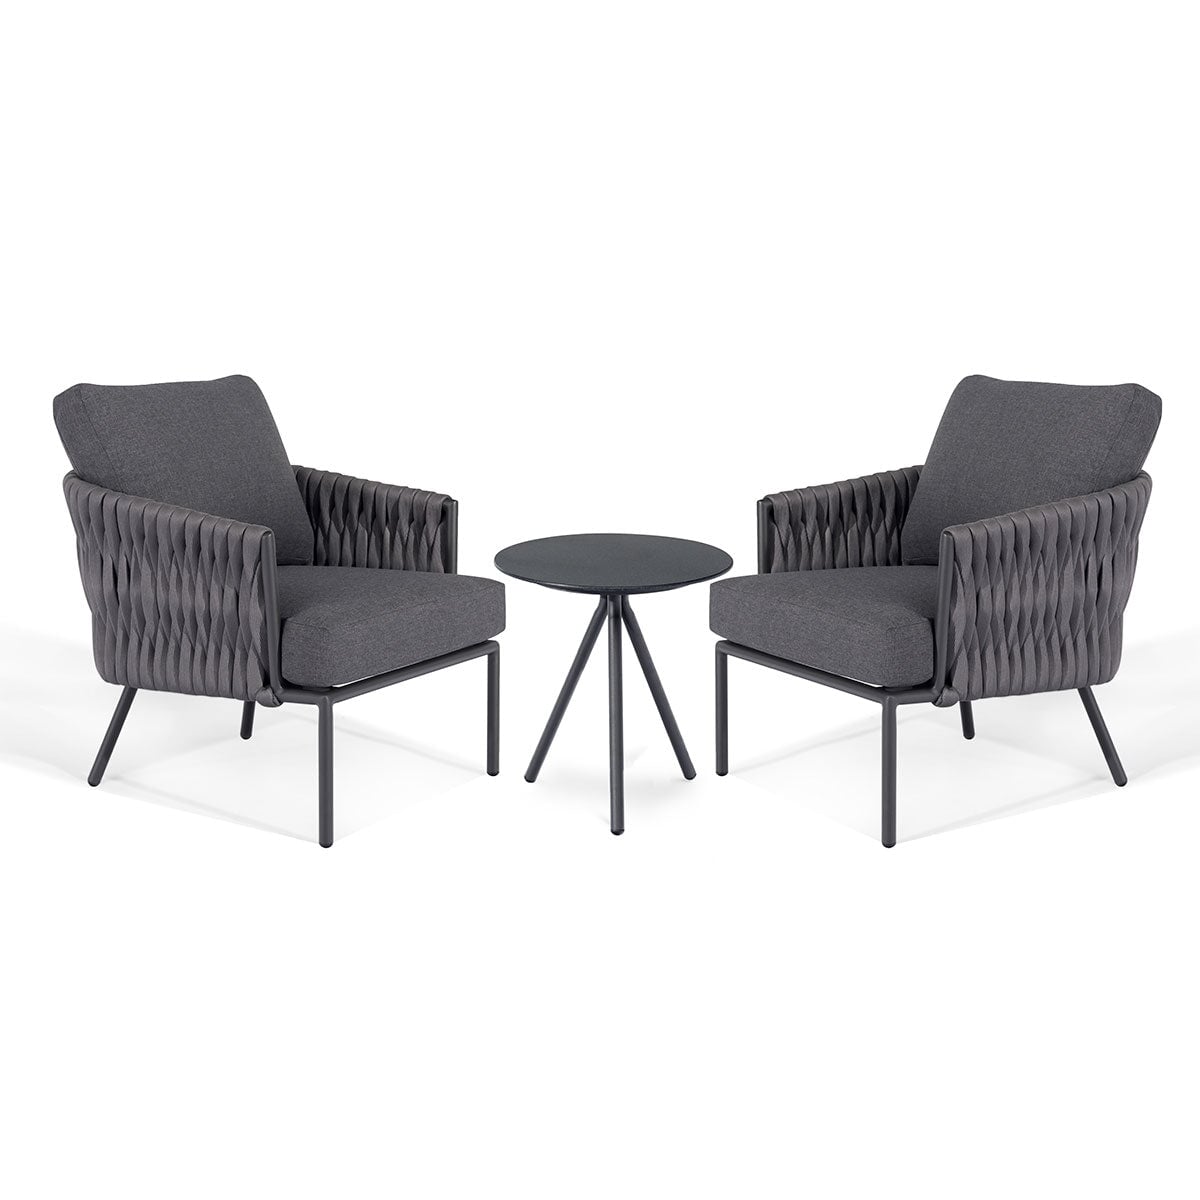 Marina Lounge Set
(2x dining chairs + side table) | Charcoal